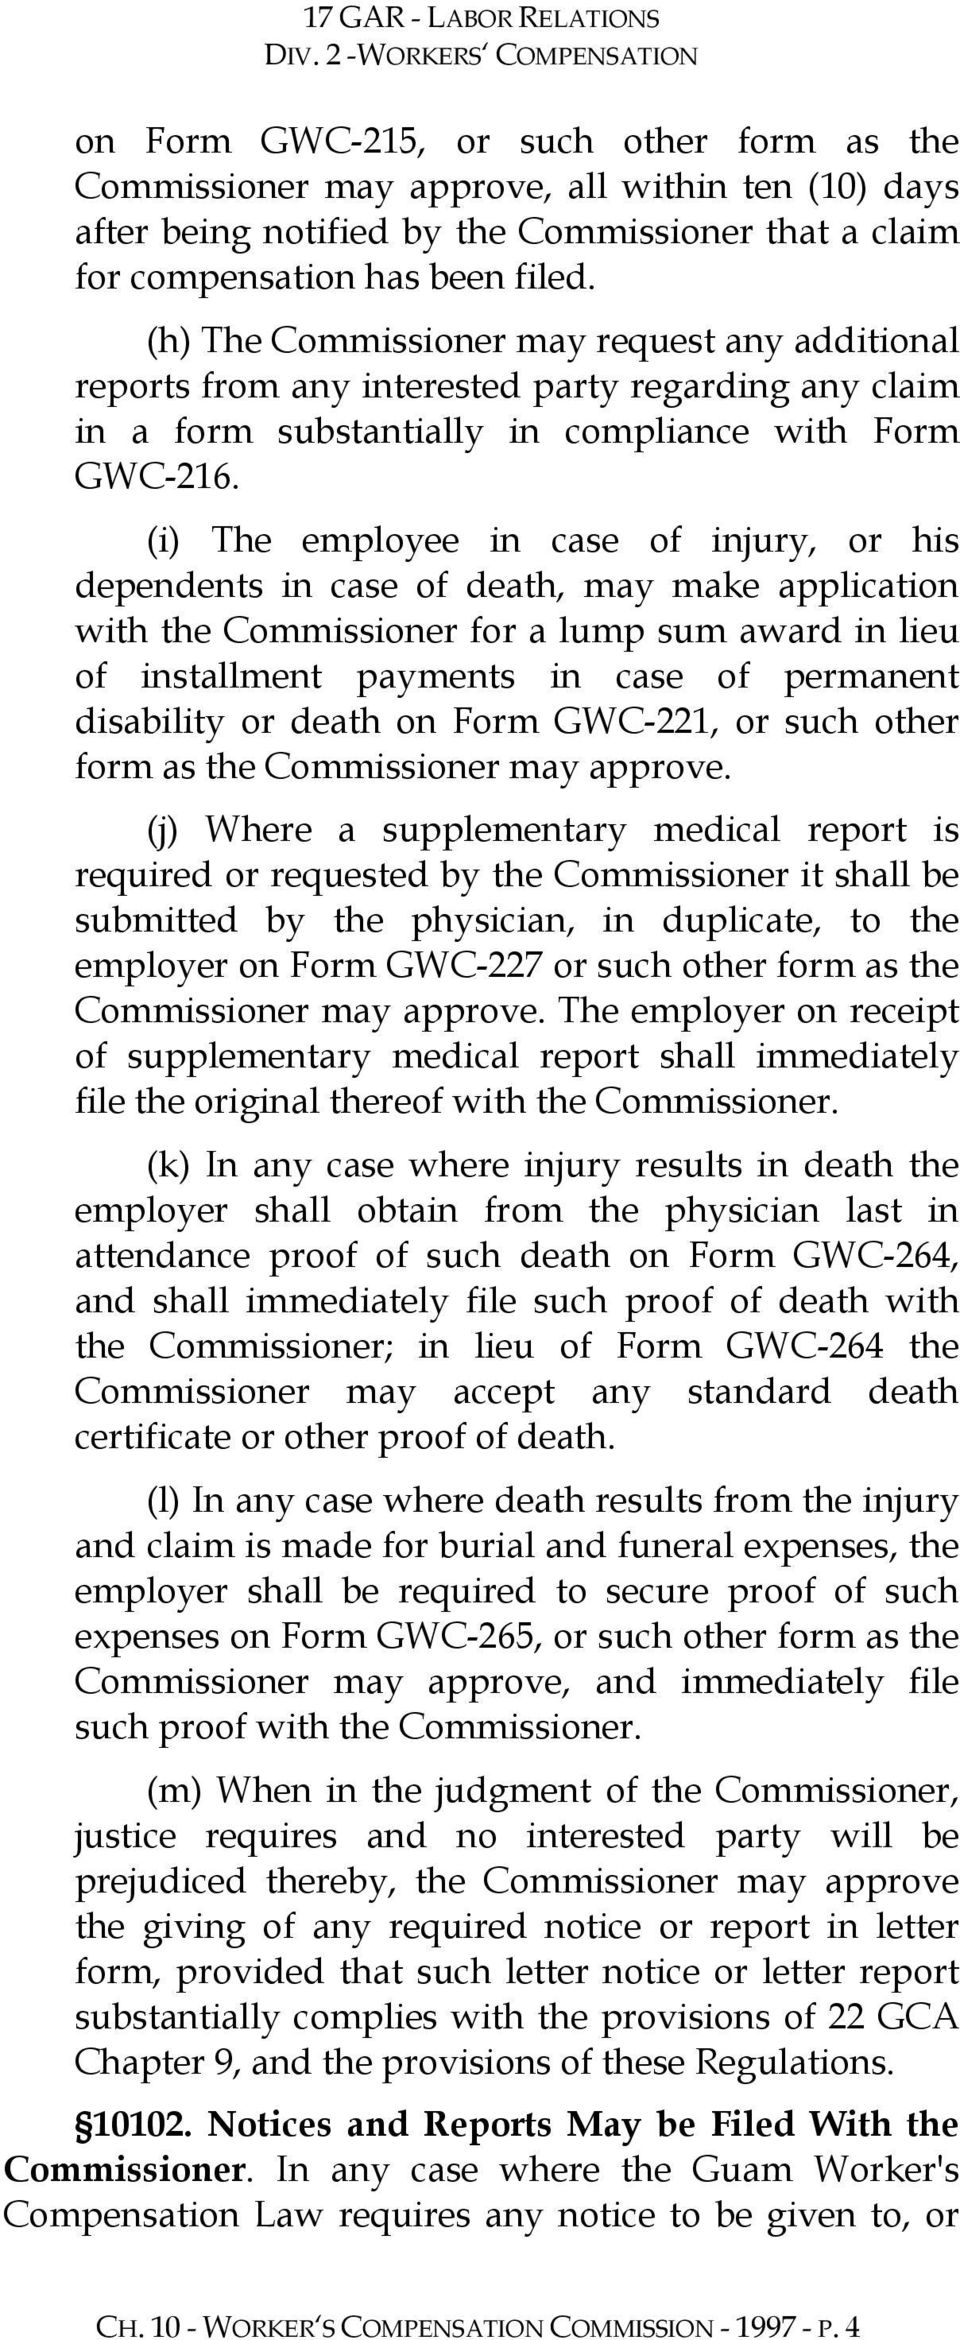 (i) The employee in case of injury, or his dependents in case of death, may make application with the Commissioner for a lump sum award in lieu of installment payments in case of permanent disability